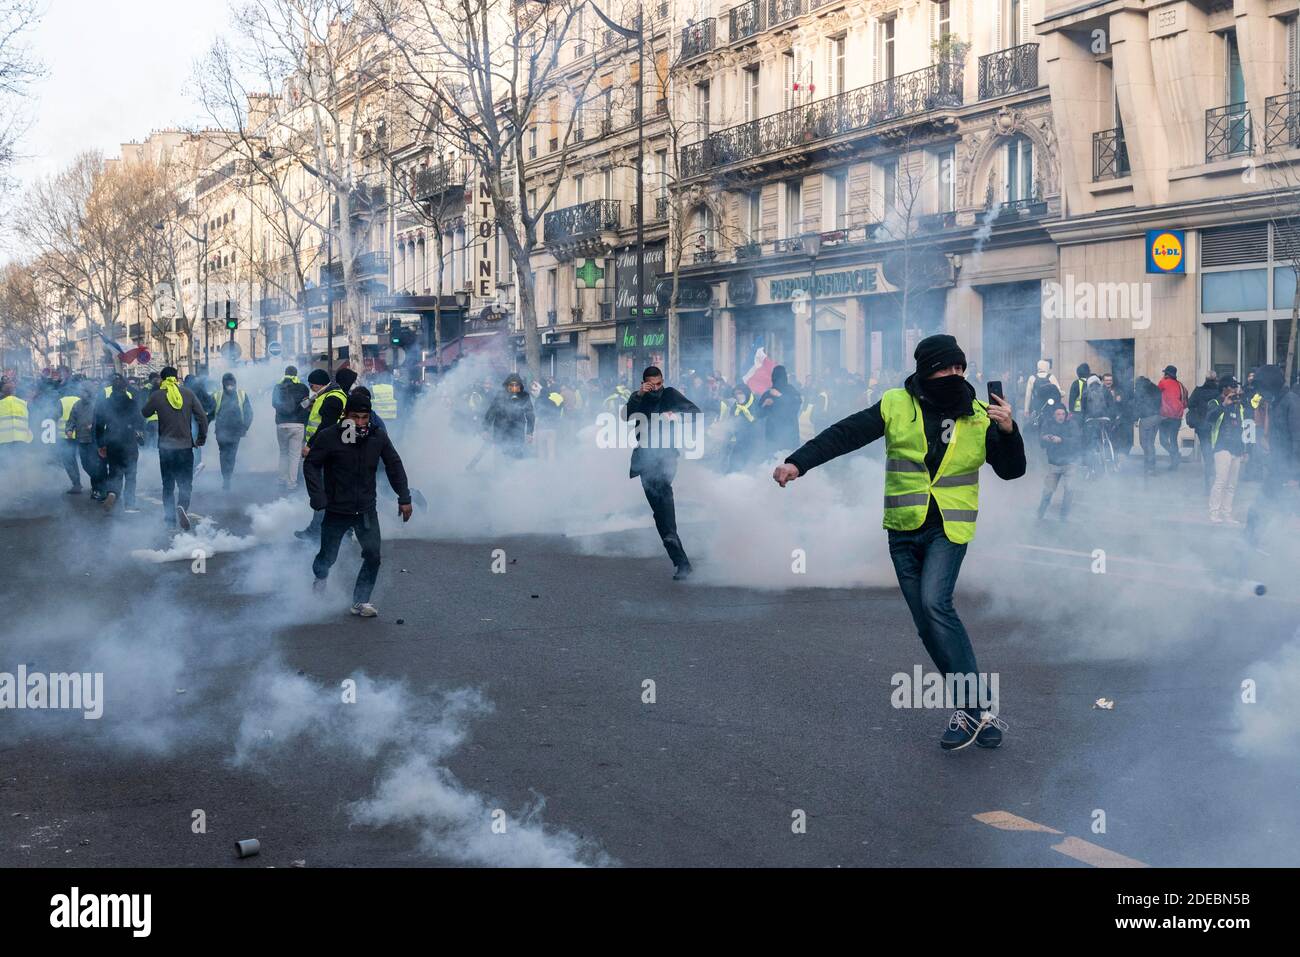 Several thousand people took part in act 19 of the Yellow Jackets (Gilets  Jaunes) mobilization in Paris. A week after the violent clashes on the  Champs-Elysées, the avenue was banned from demonstration